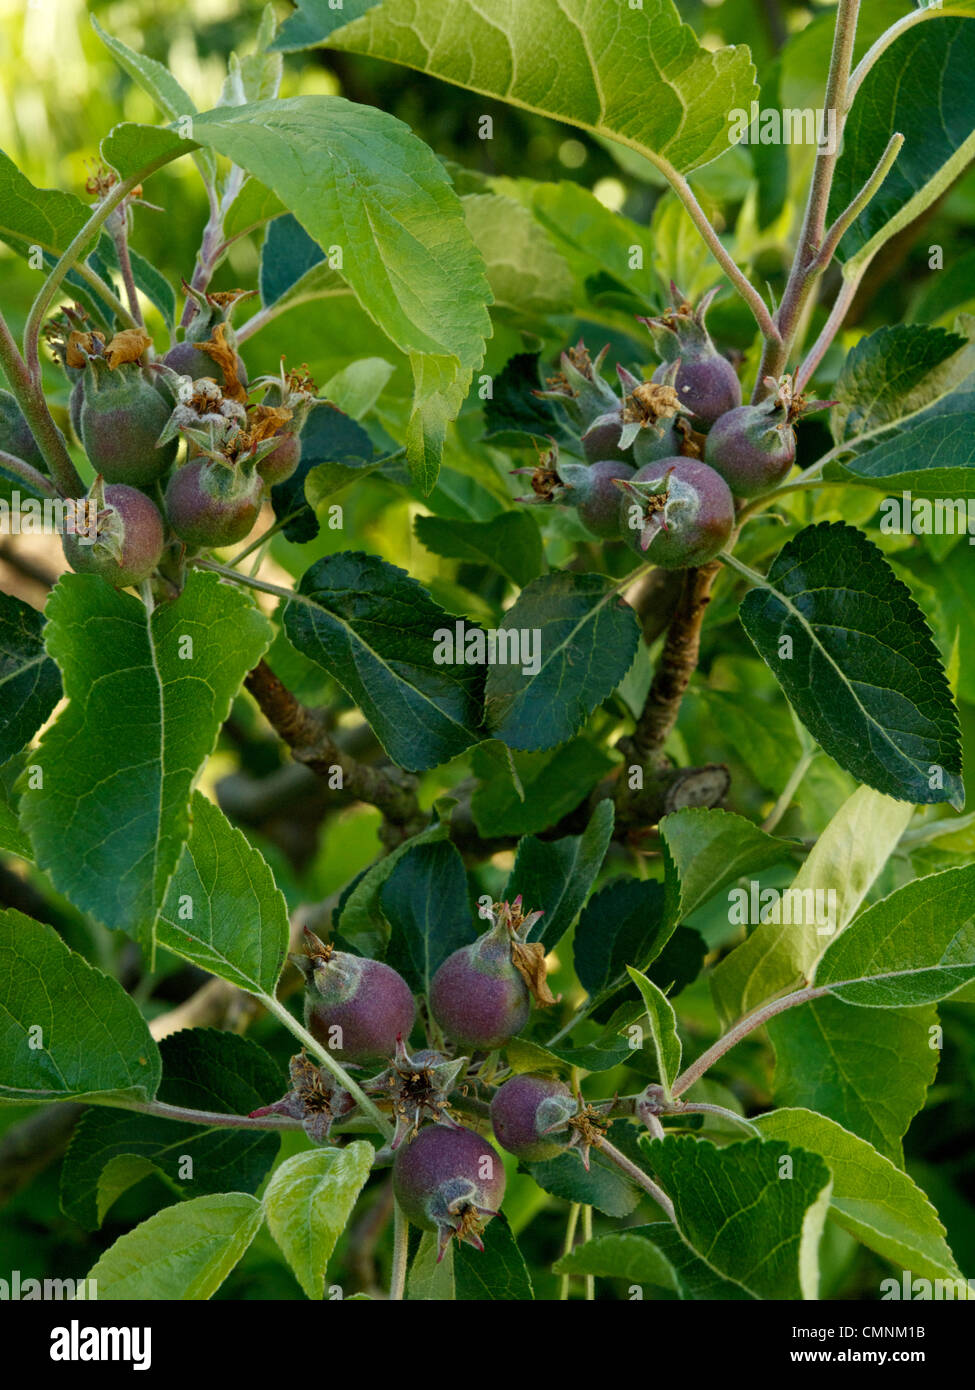 Newly formed Discovery apples on a tree Stock Photo